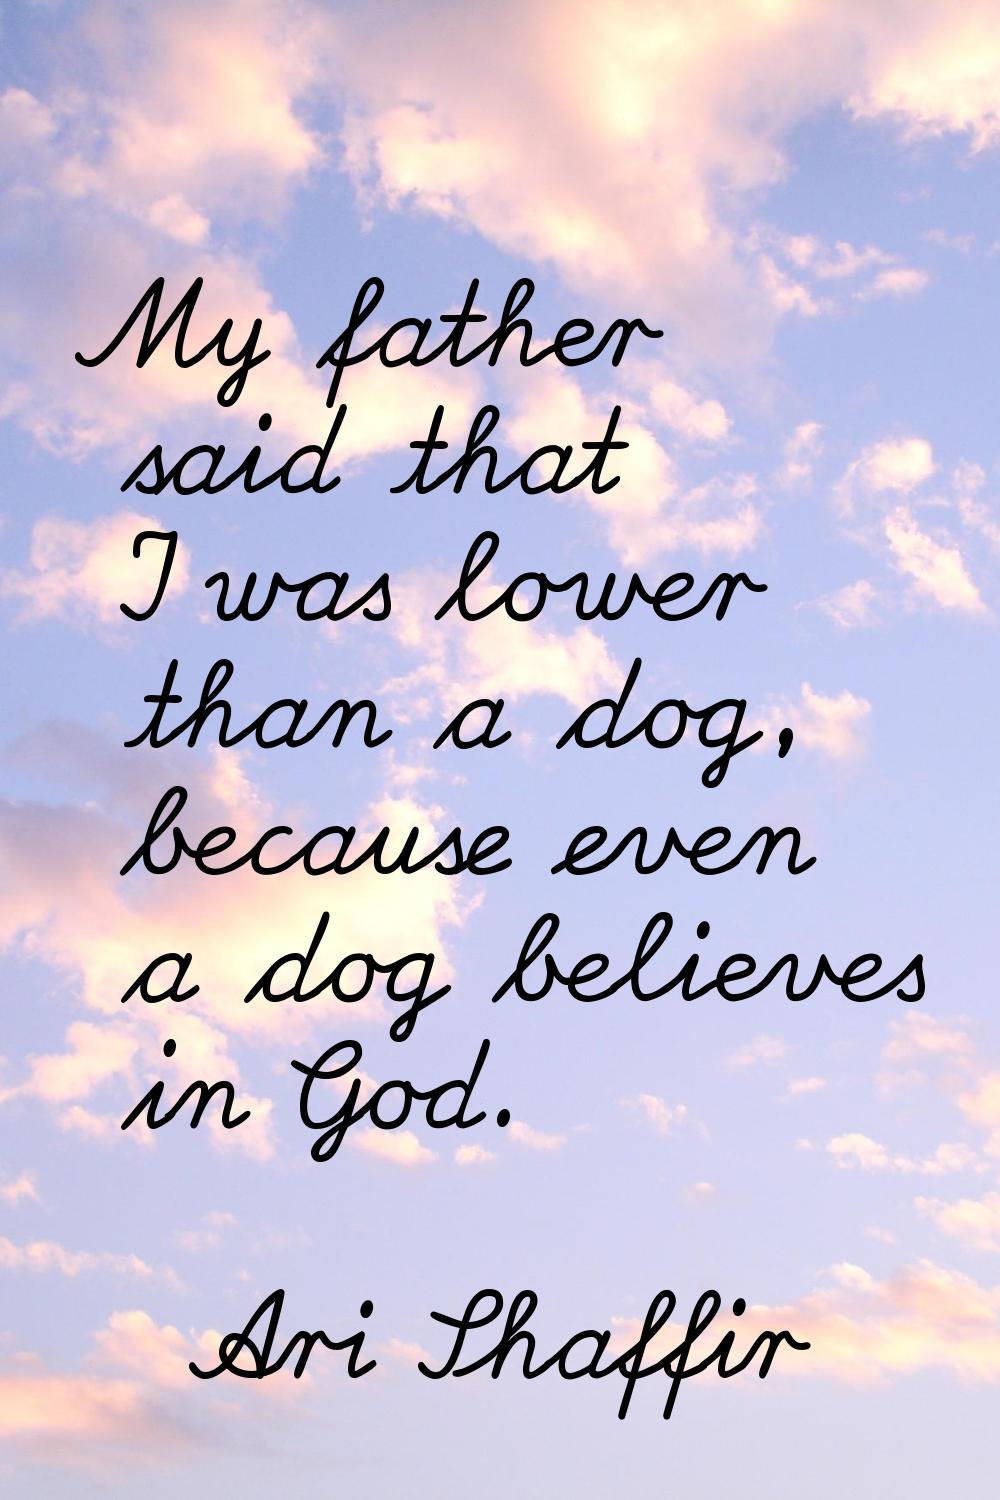 My father said that I was lower than a dog, because even a dog believes in God.